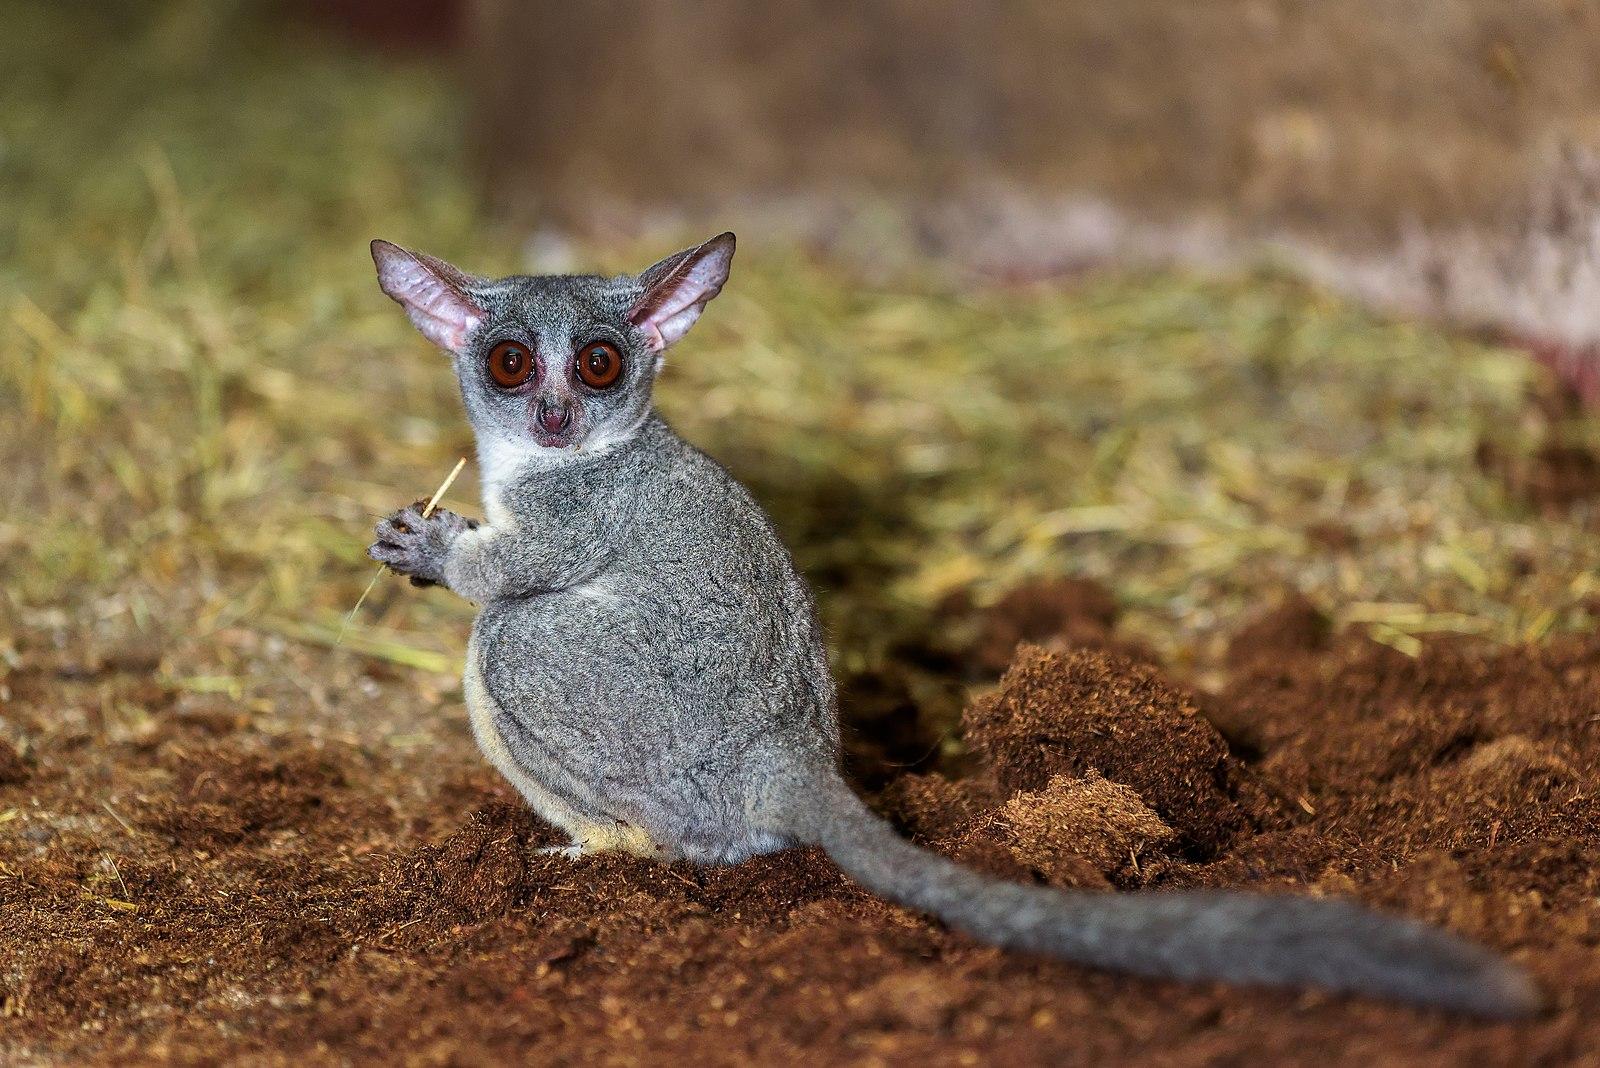 Small primate with big eyes and long tail.